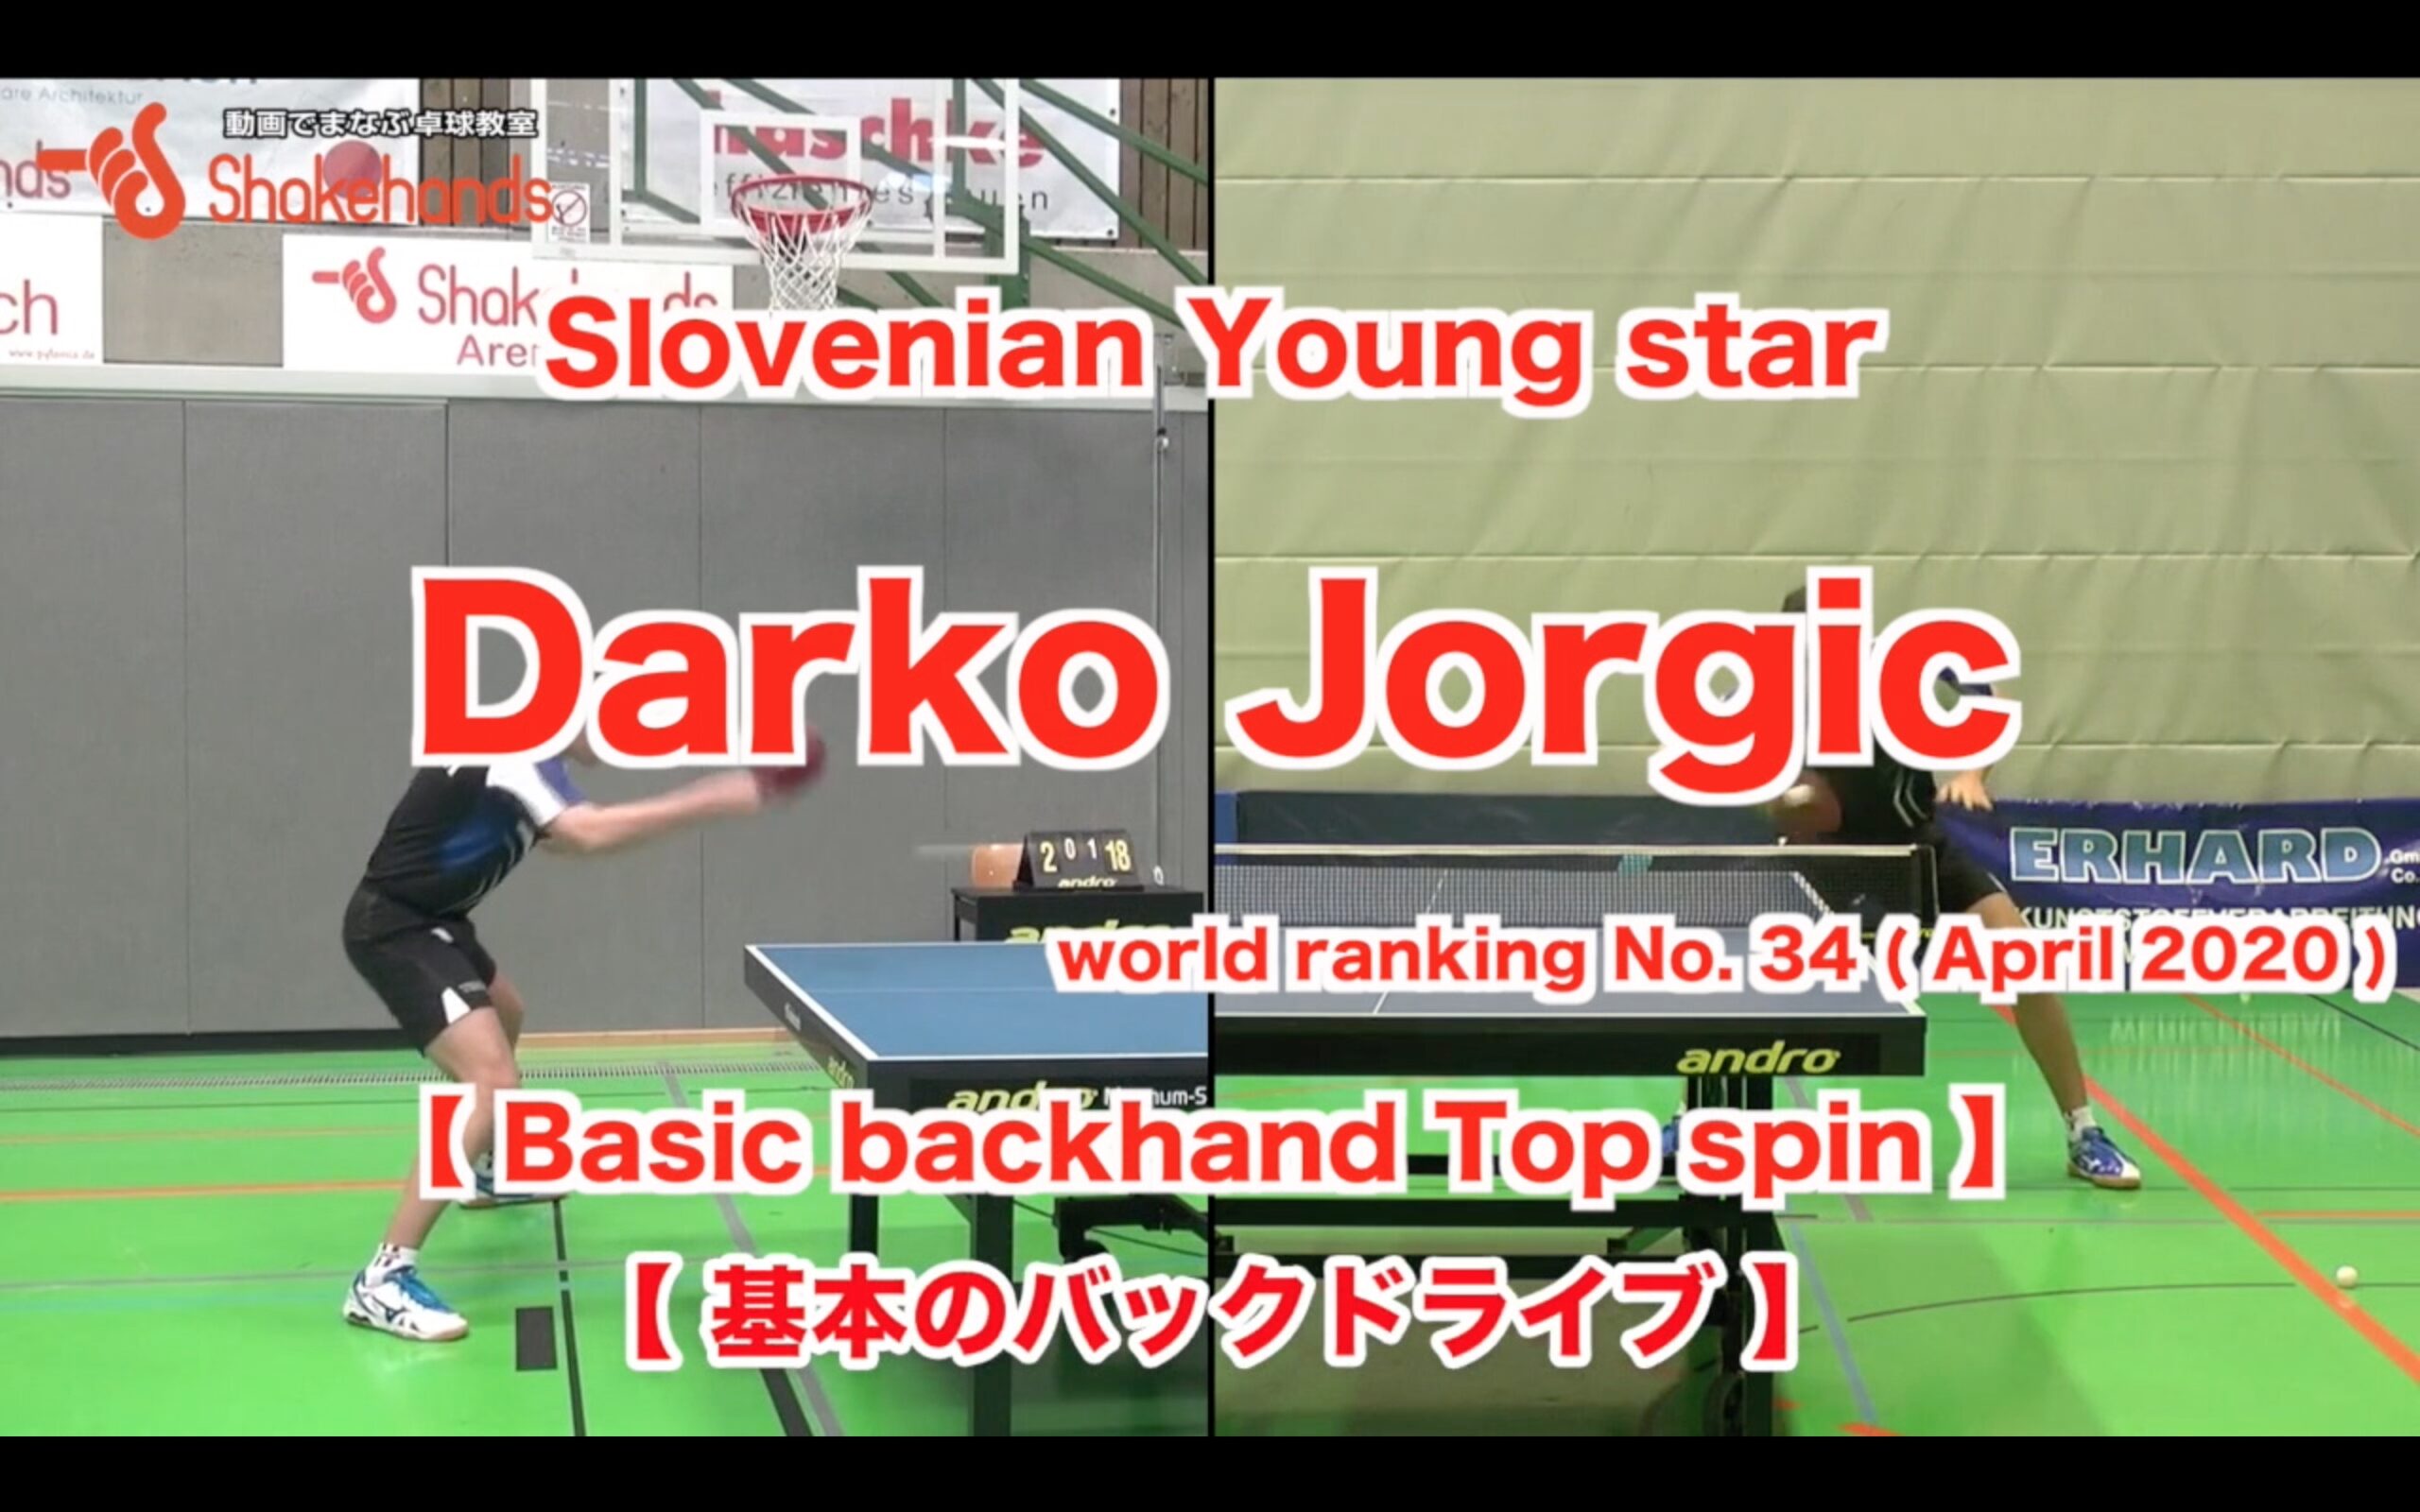 Backhand top spin